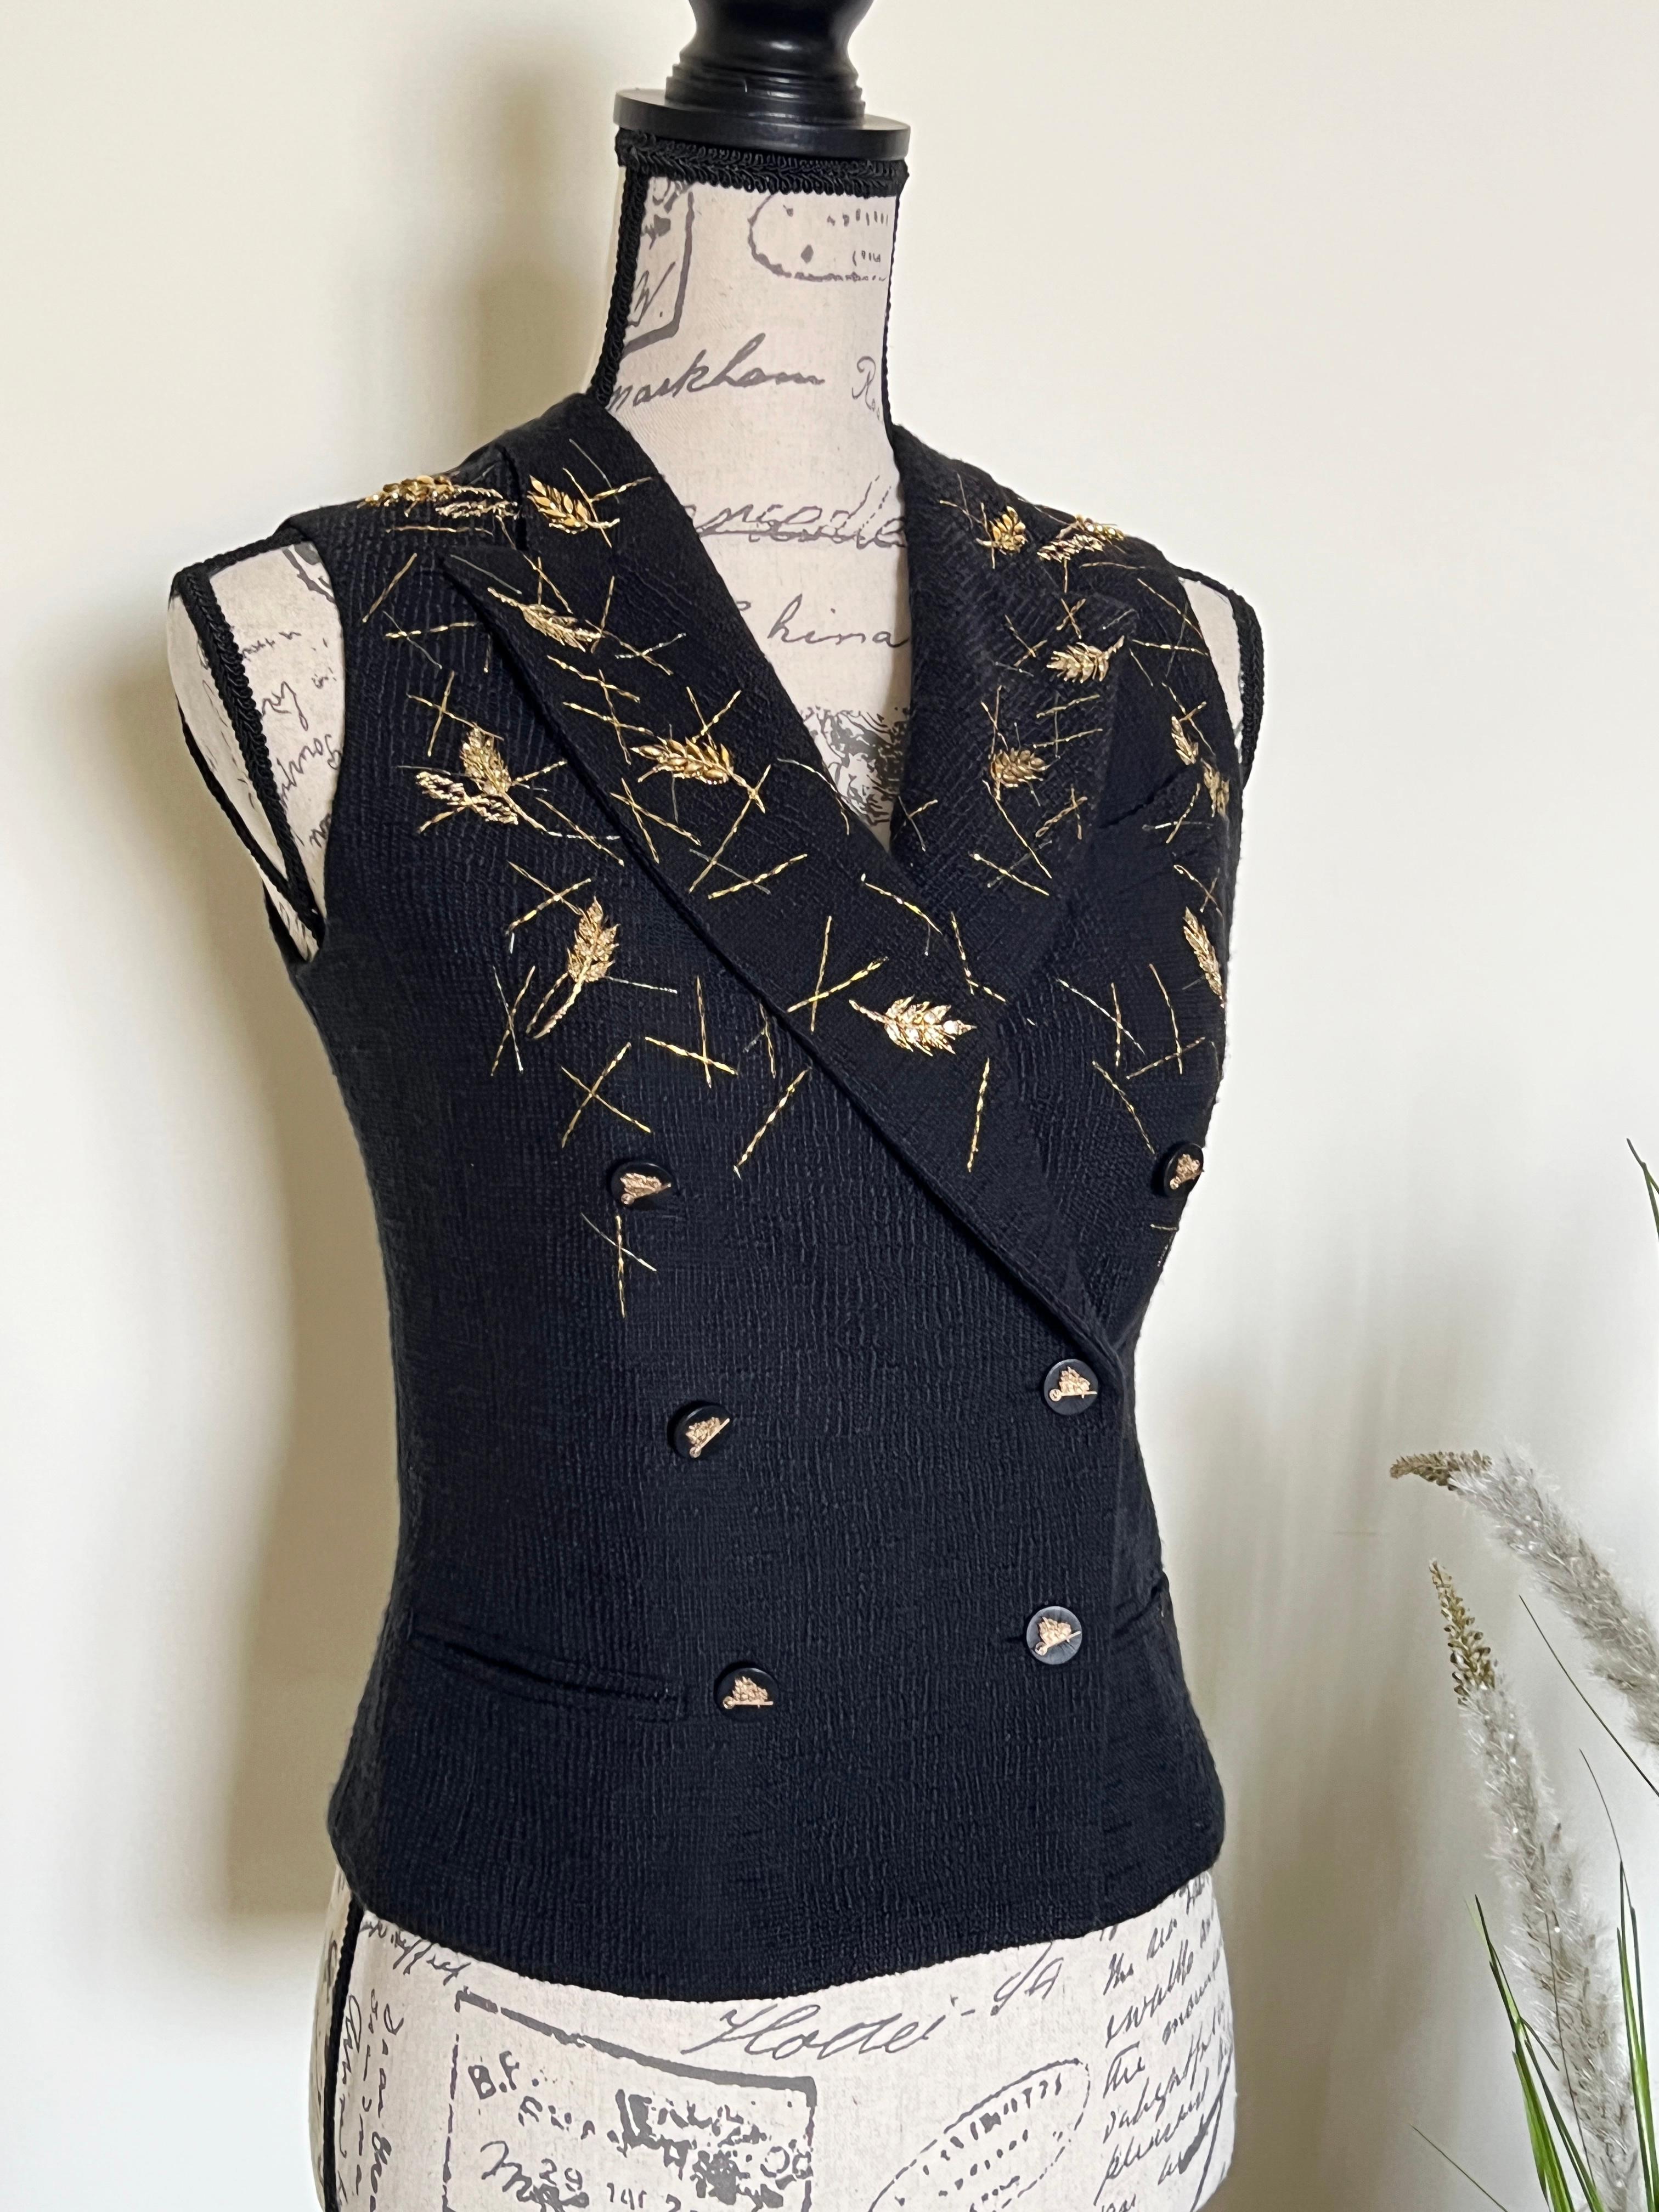 Chanel Super Rare Bejeweled Wheat Tweed Vest For Sale 4